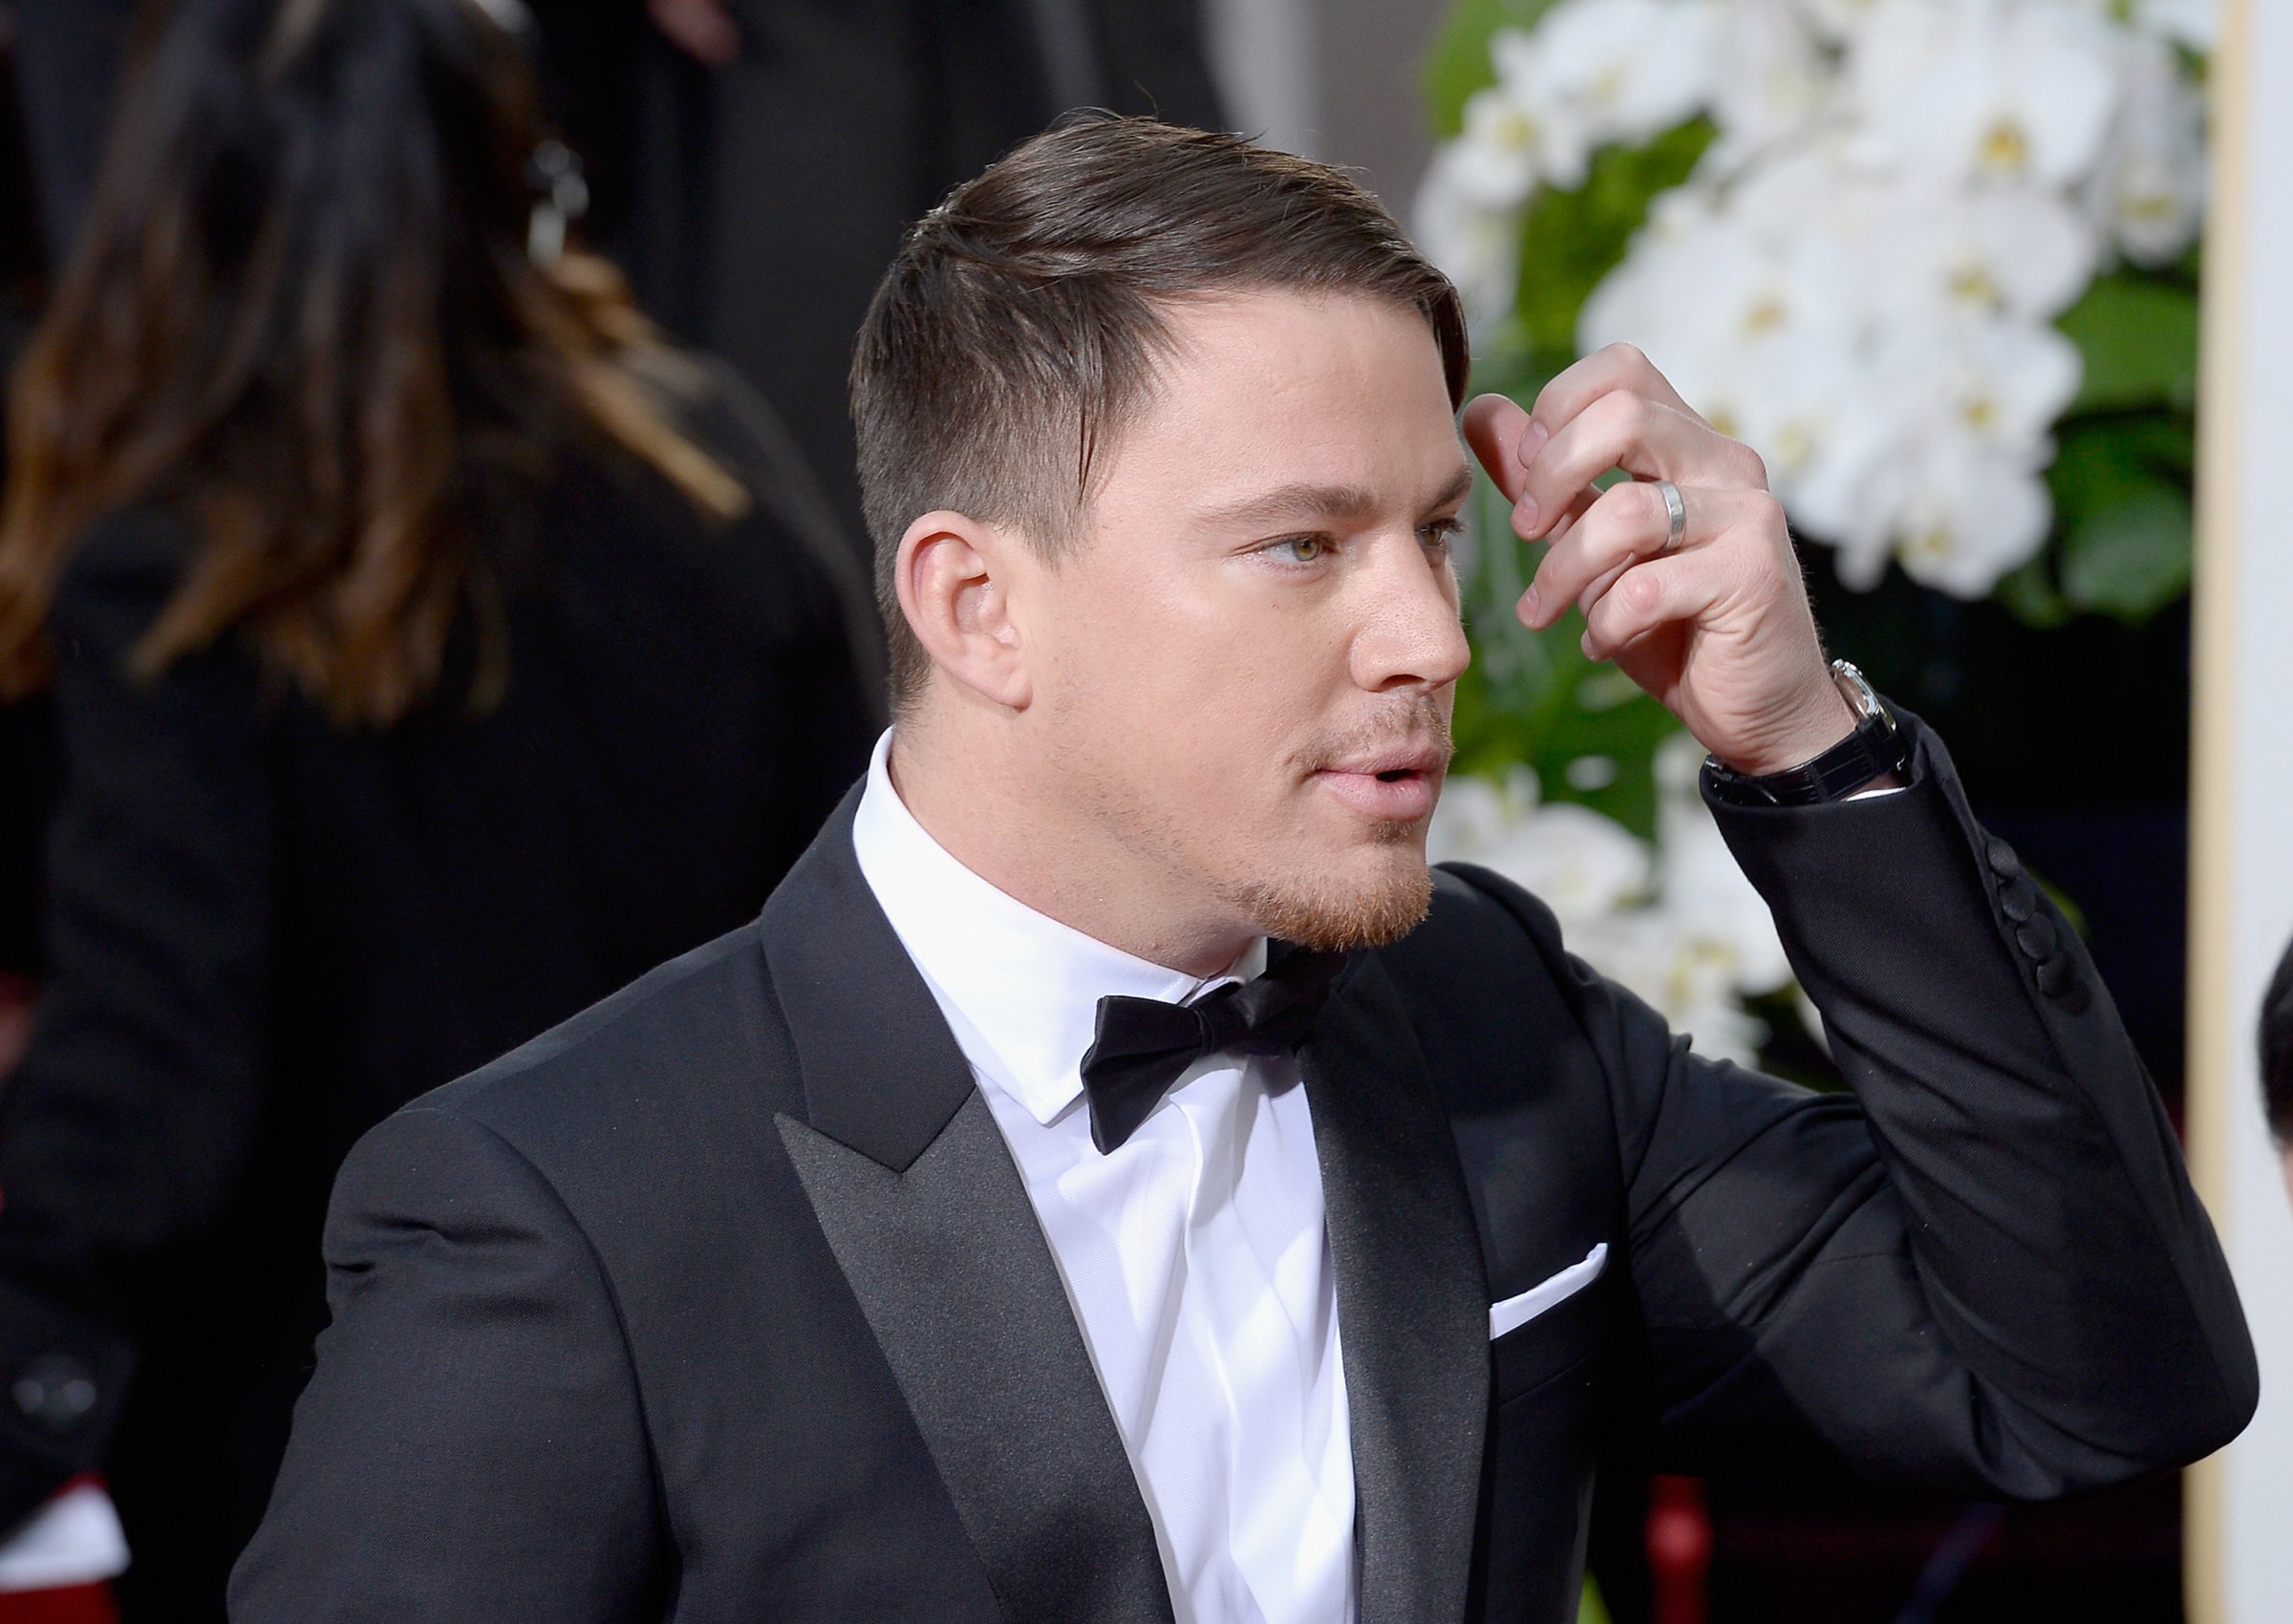 Channing Tatum arrives to the 73rd Annual Golden Globe Awards on Jan. 10, 2016 in Los Angeles.